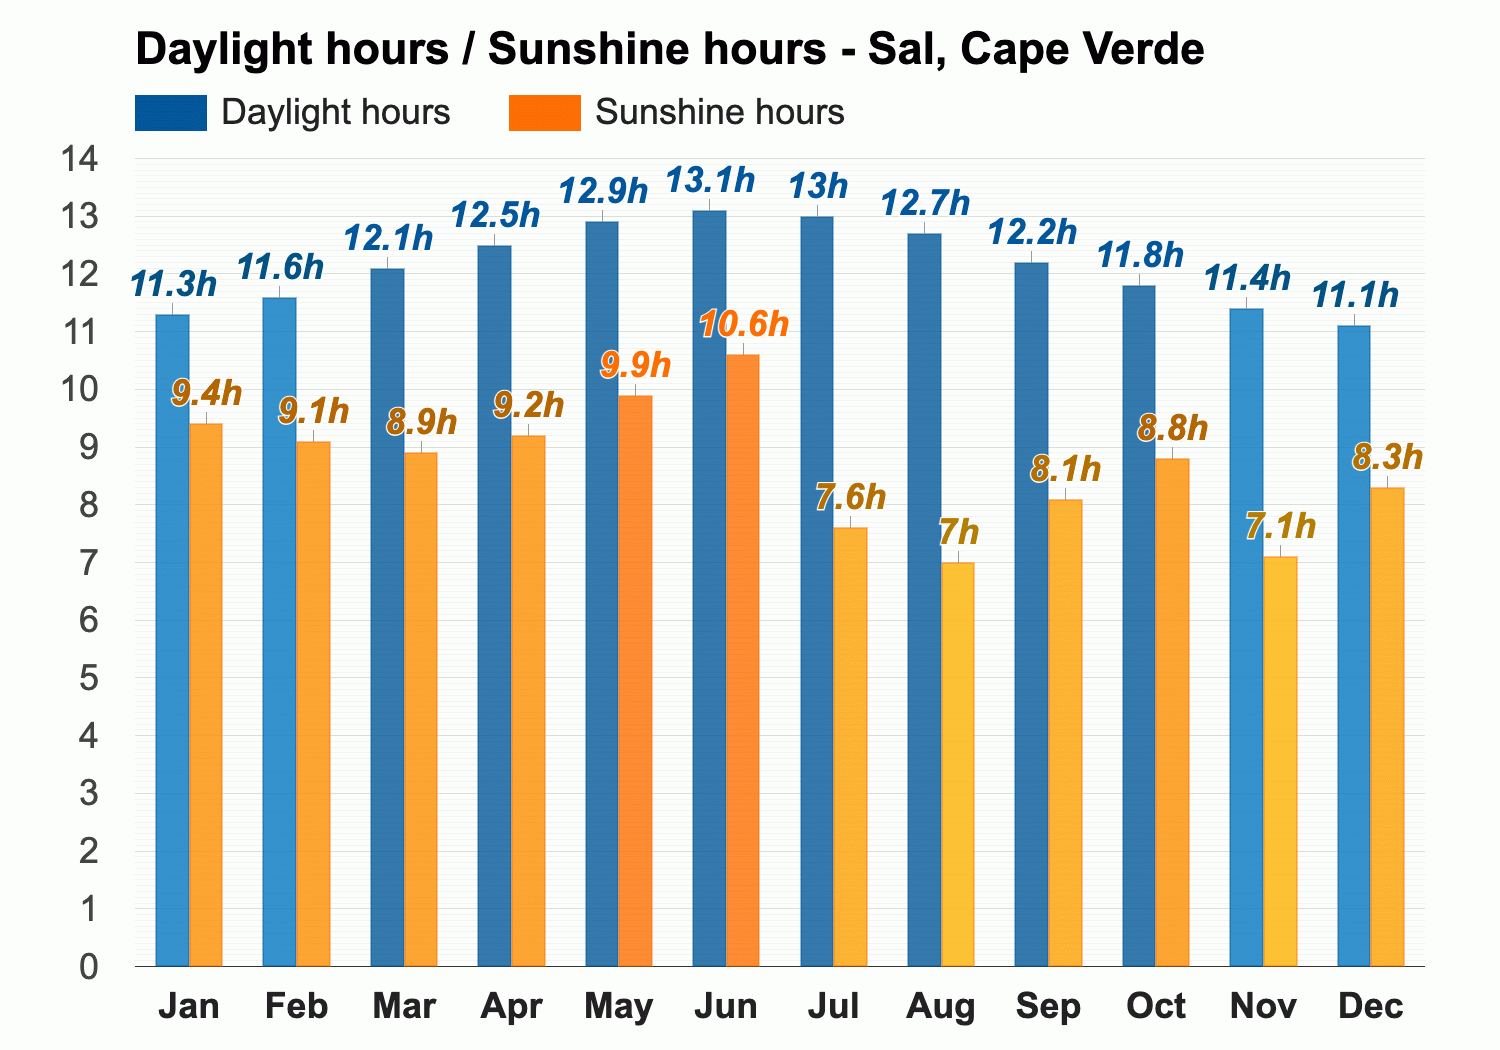 Sal, Cape Verde - August weather forecast and climate information | Weather  Atlas